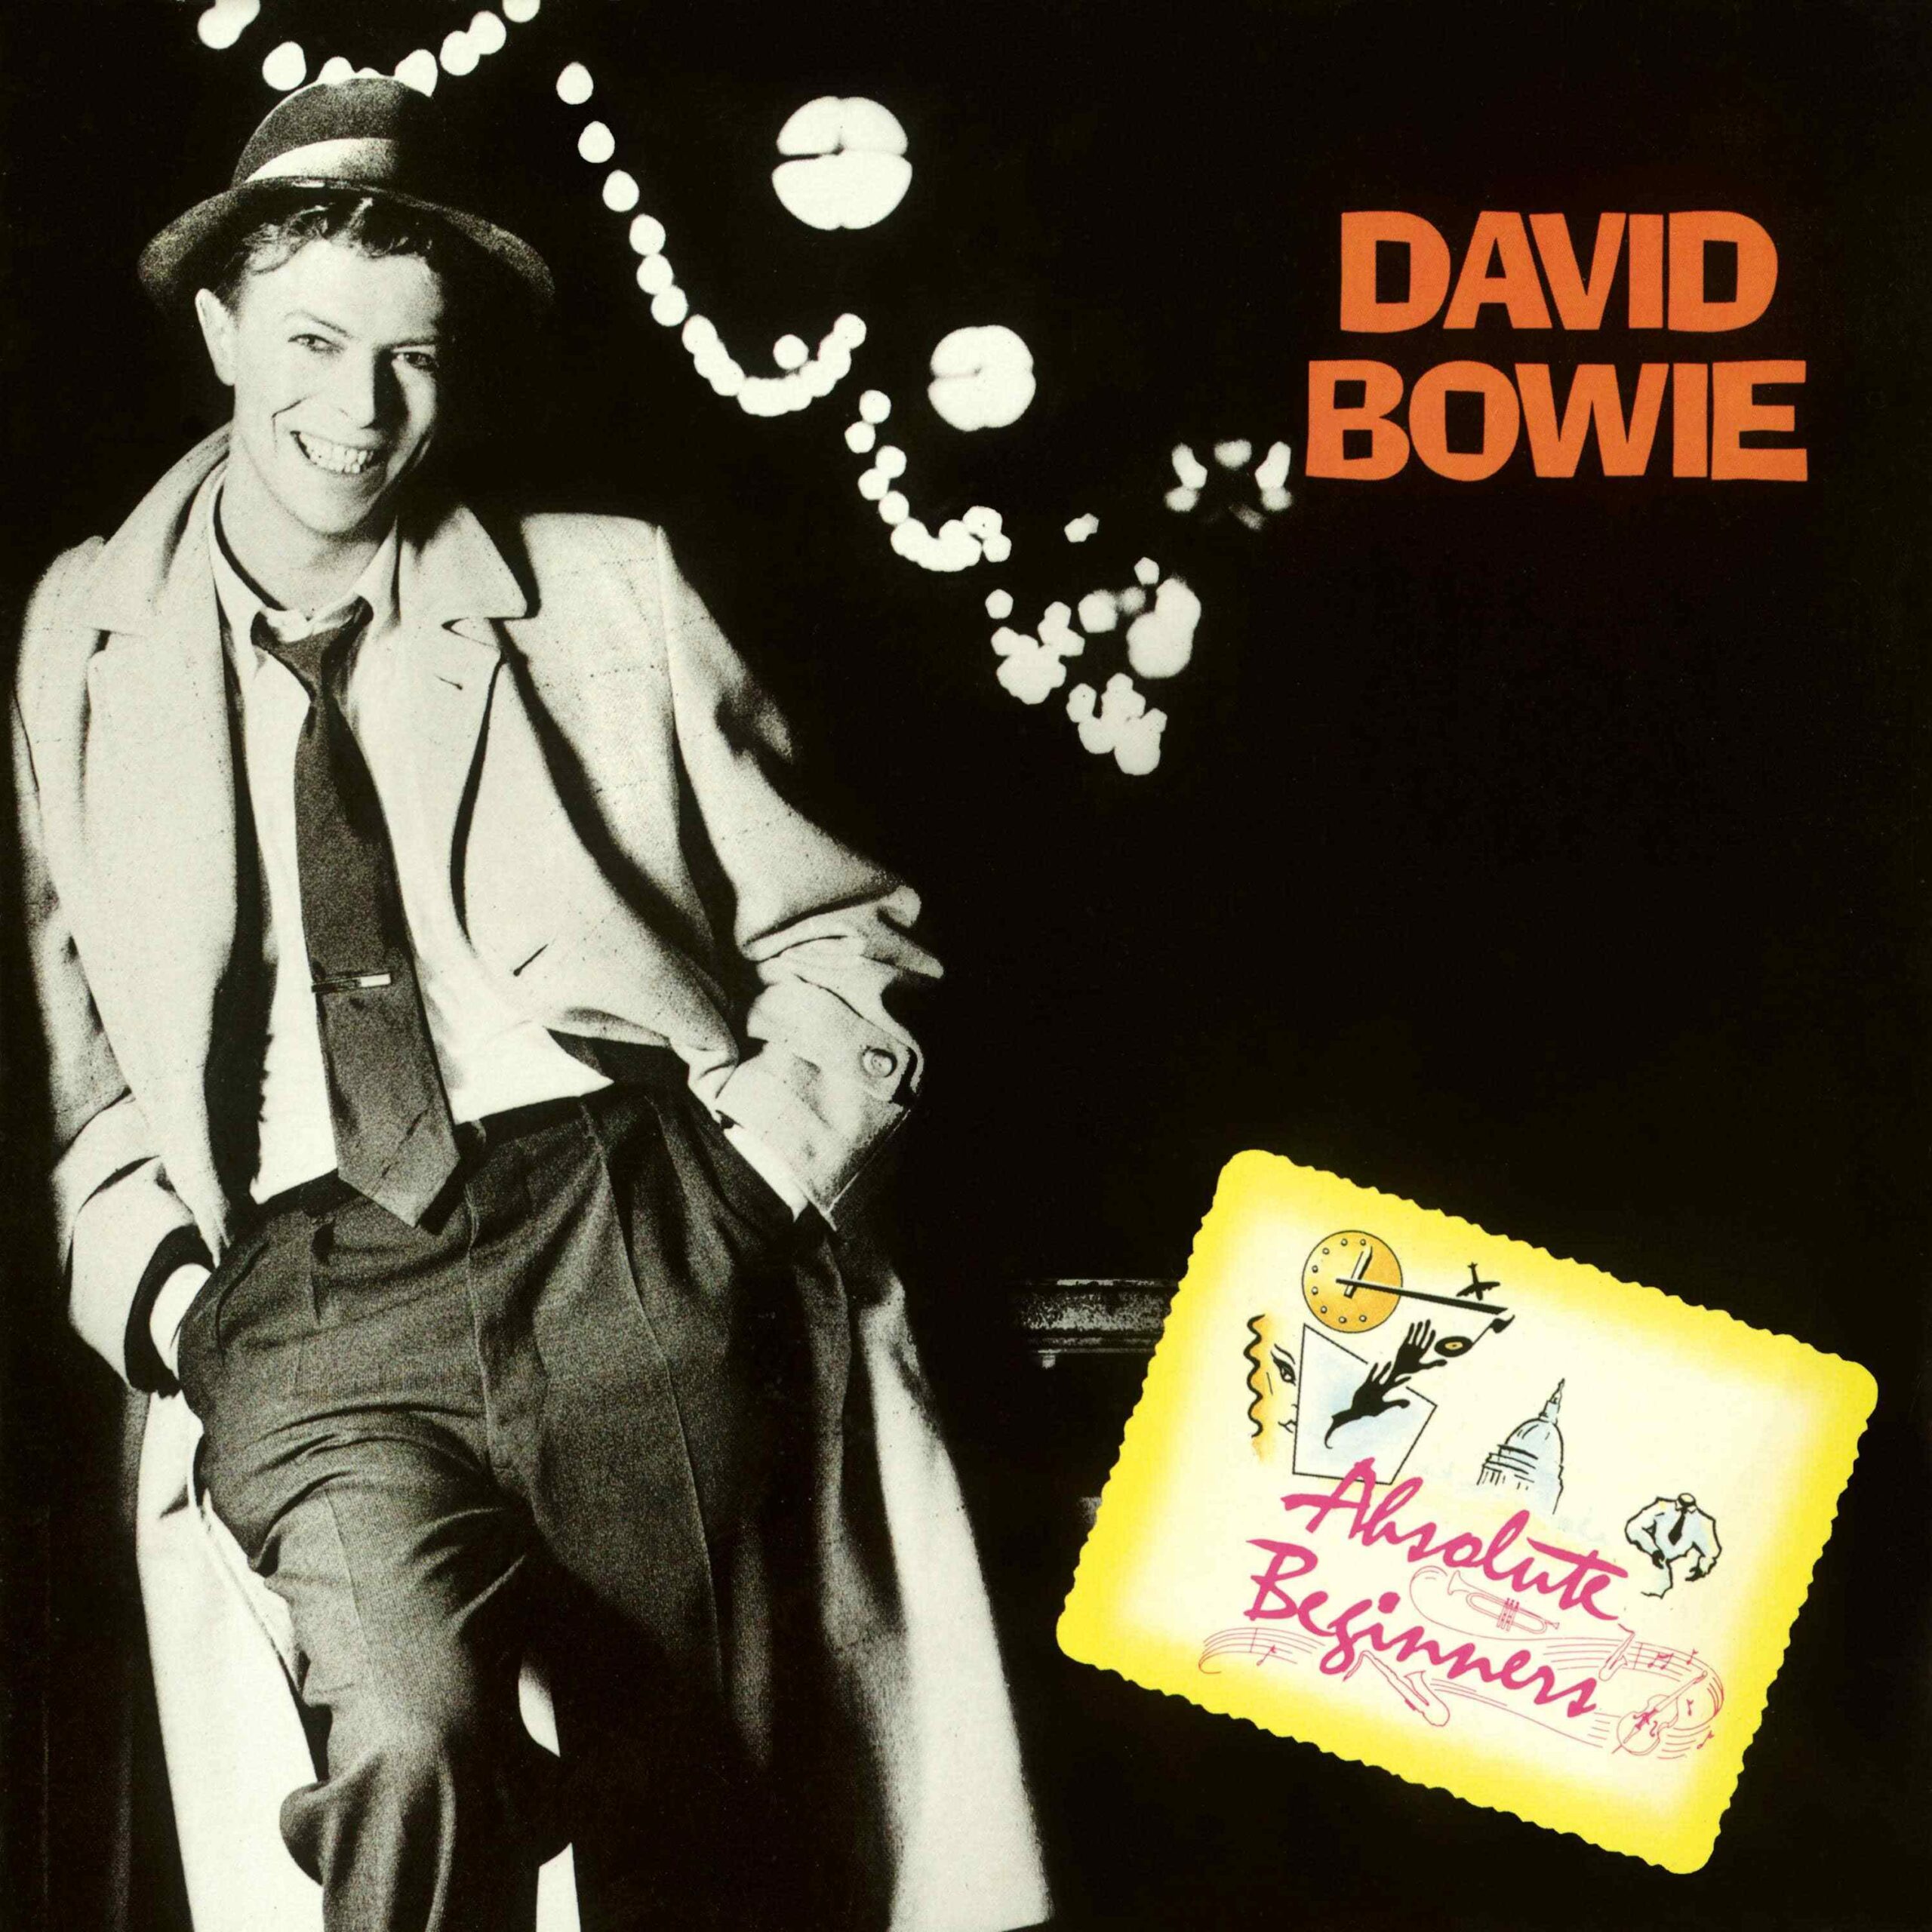 Iterations: David Bowie’s “Absolute Beginners”